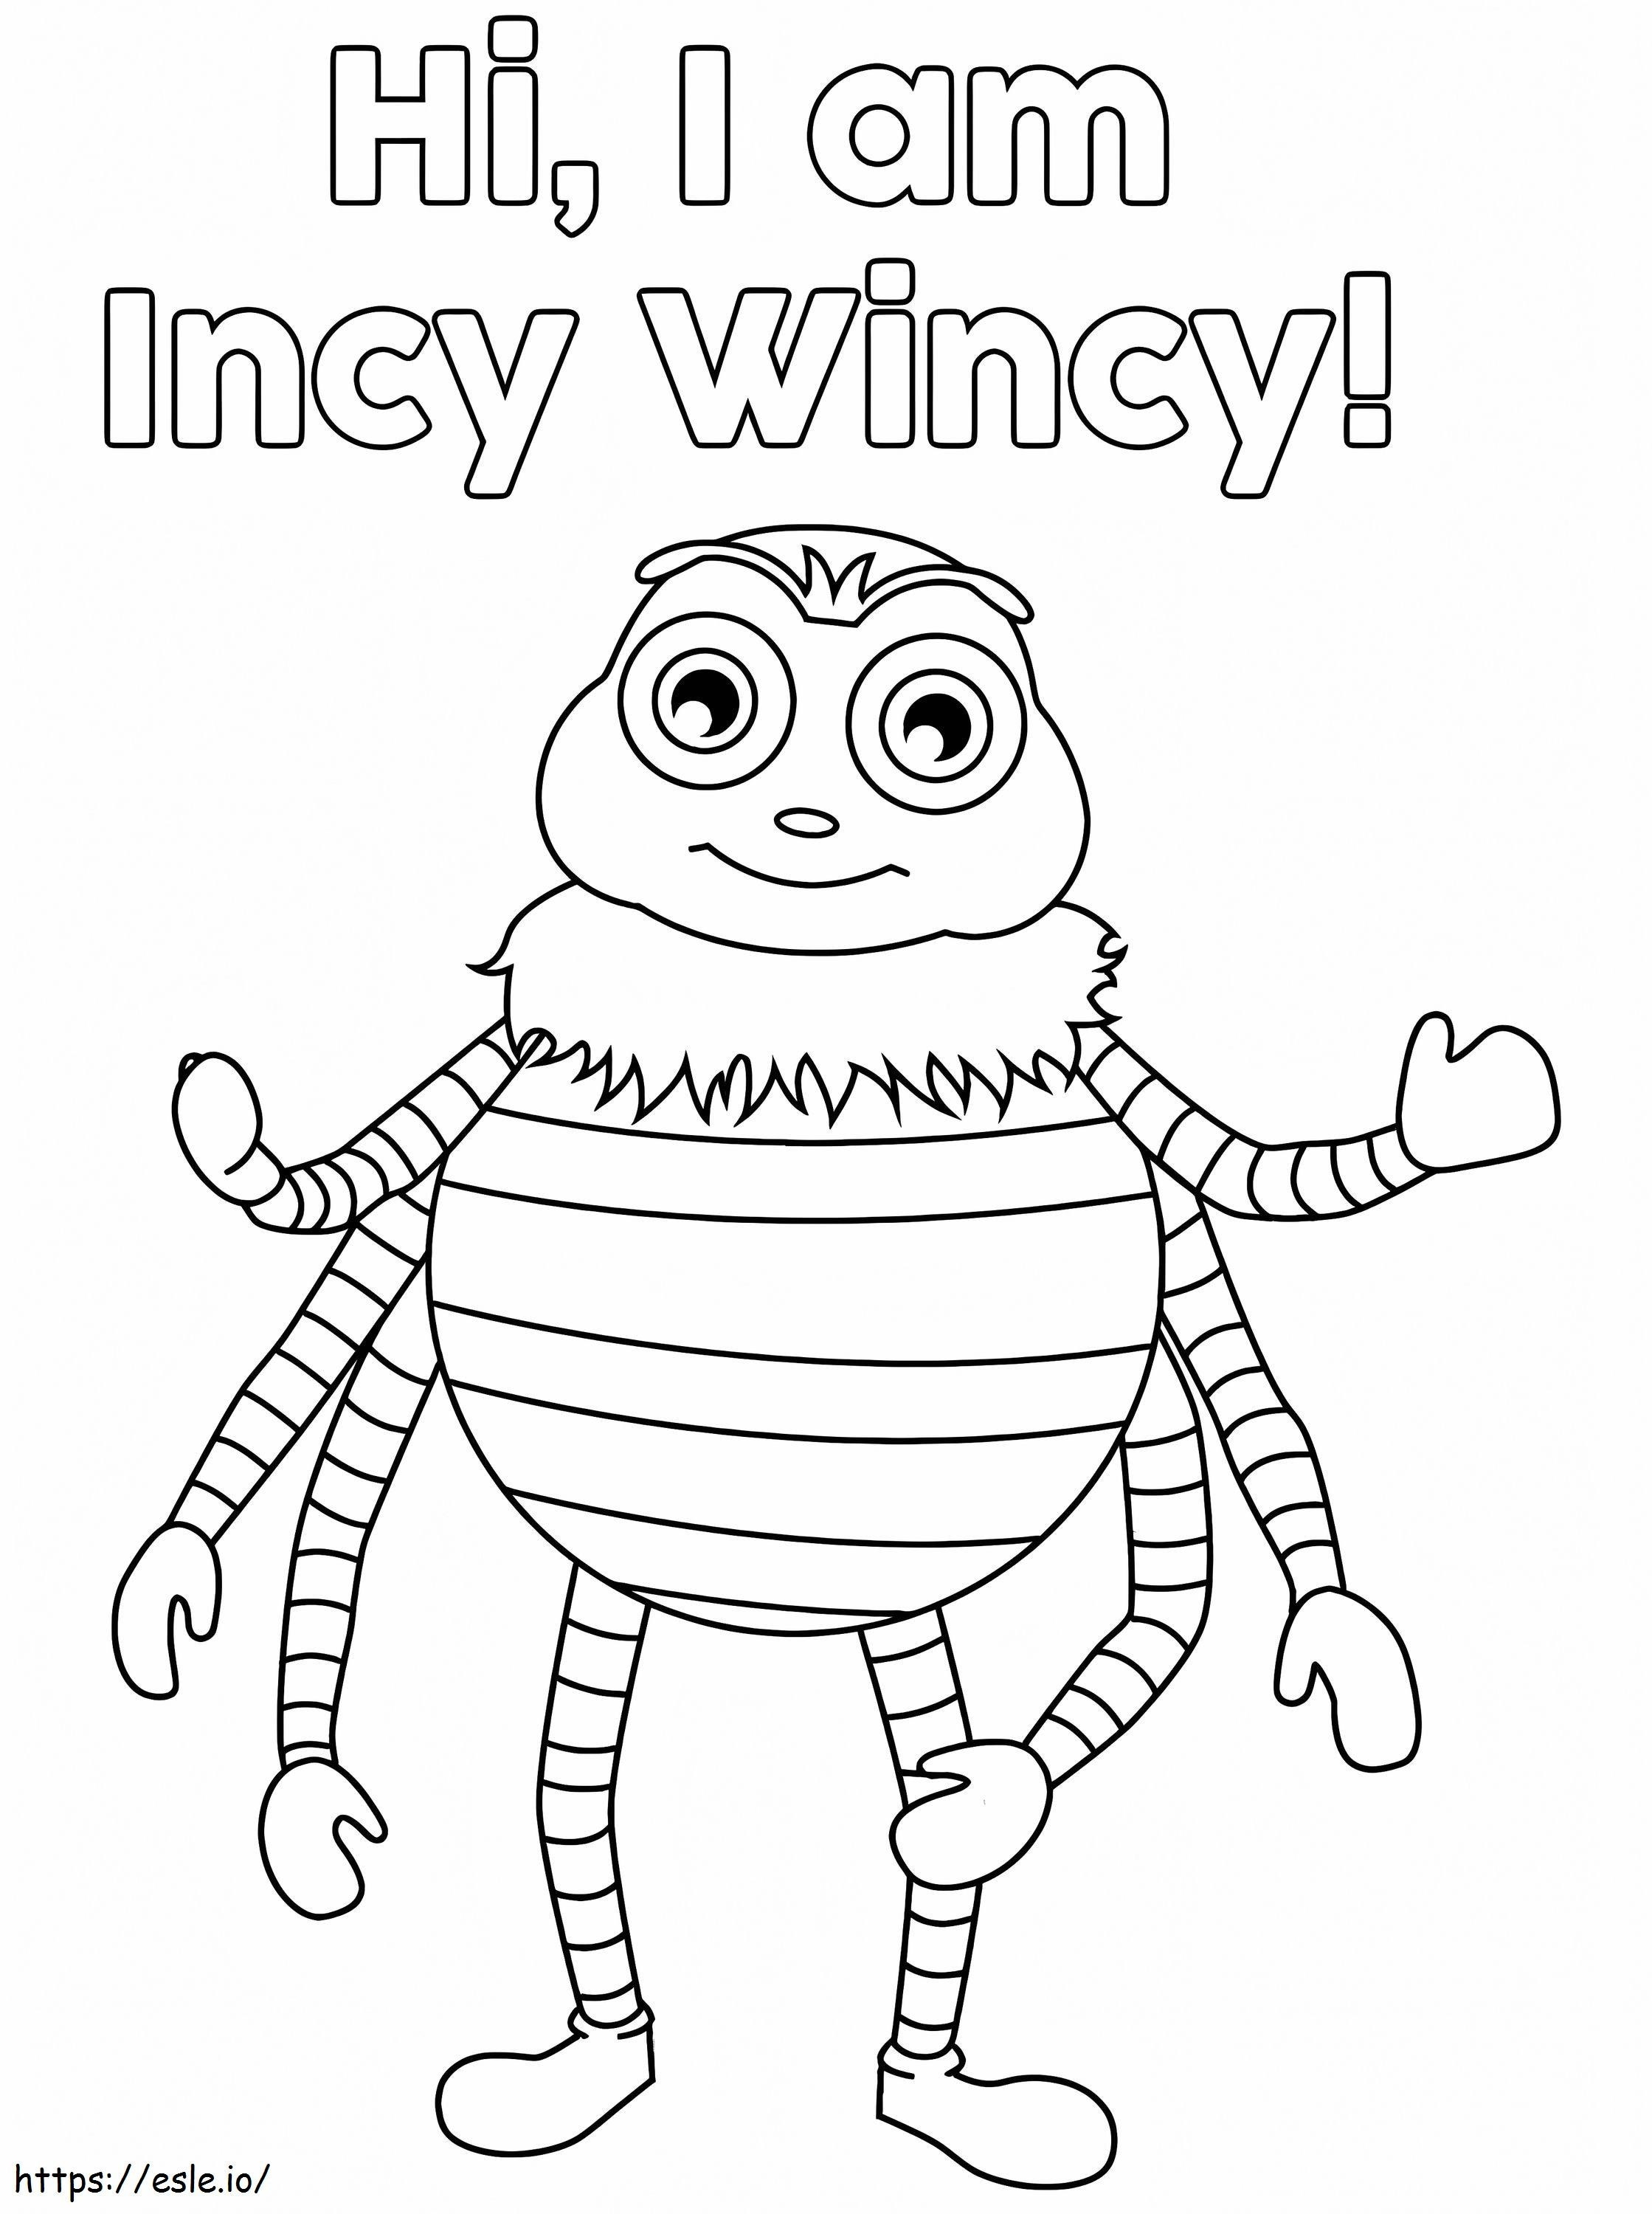 Incy Wincy Little Baby Bum coloring page